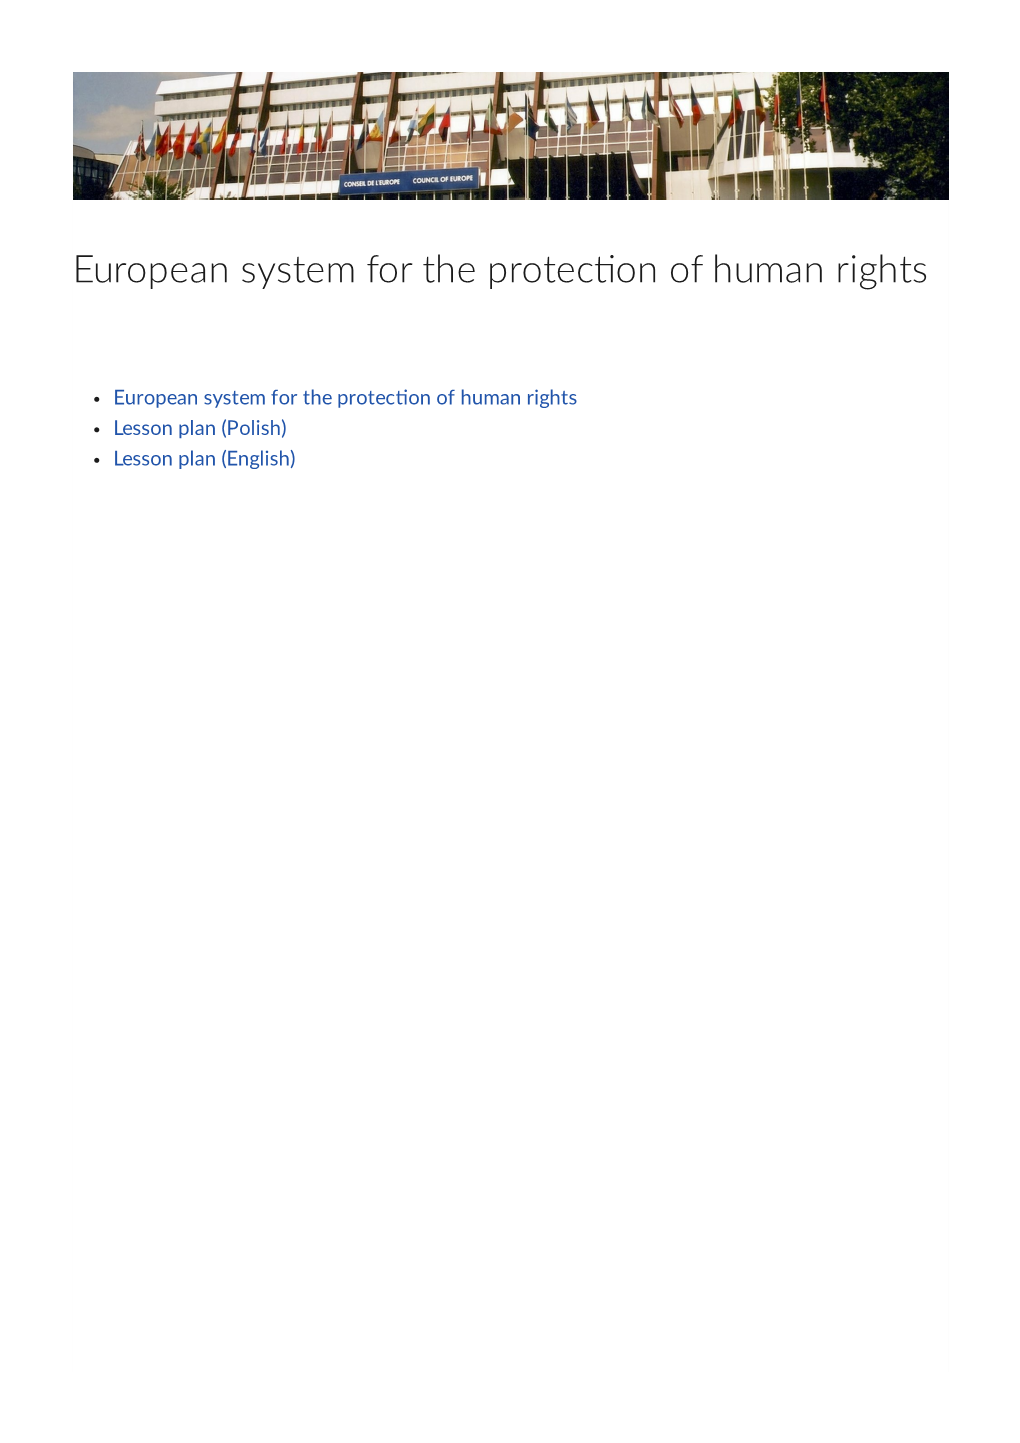 European System for the Protec on of Human Rights